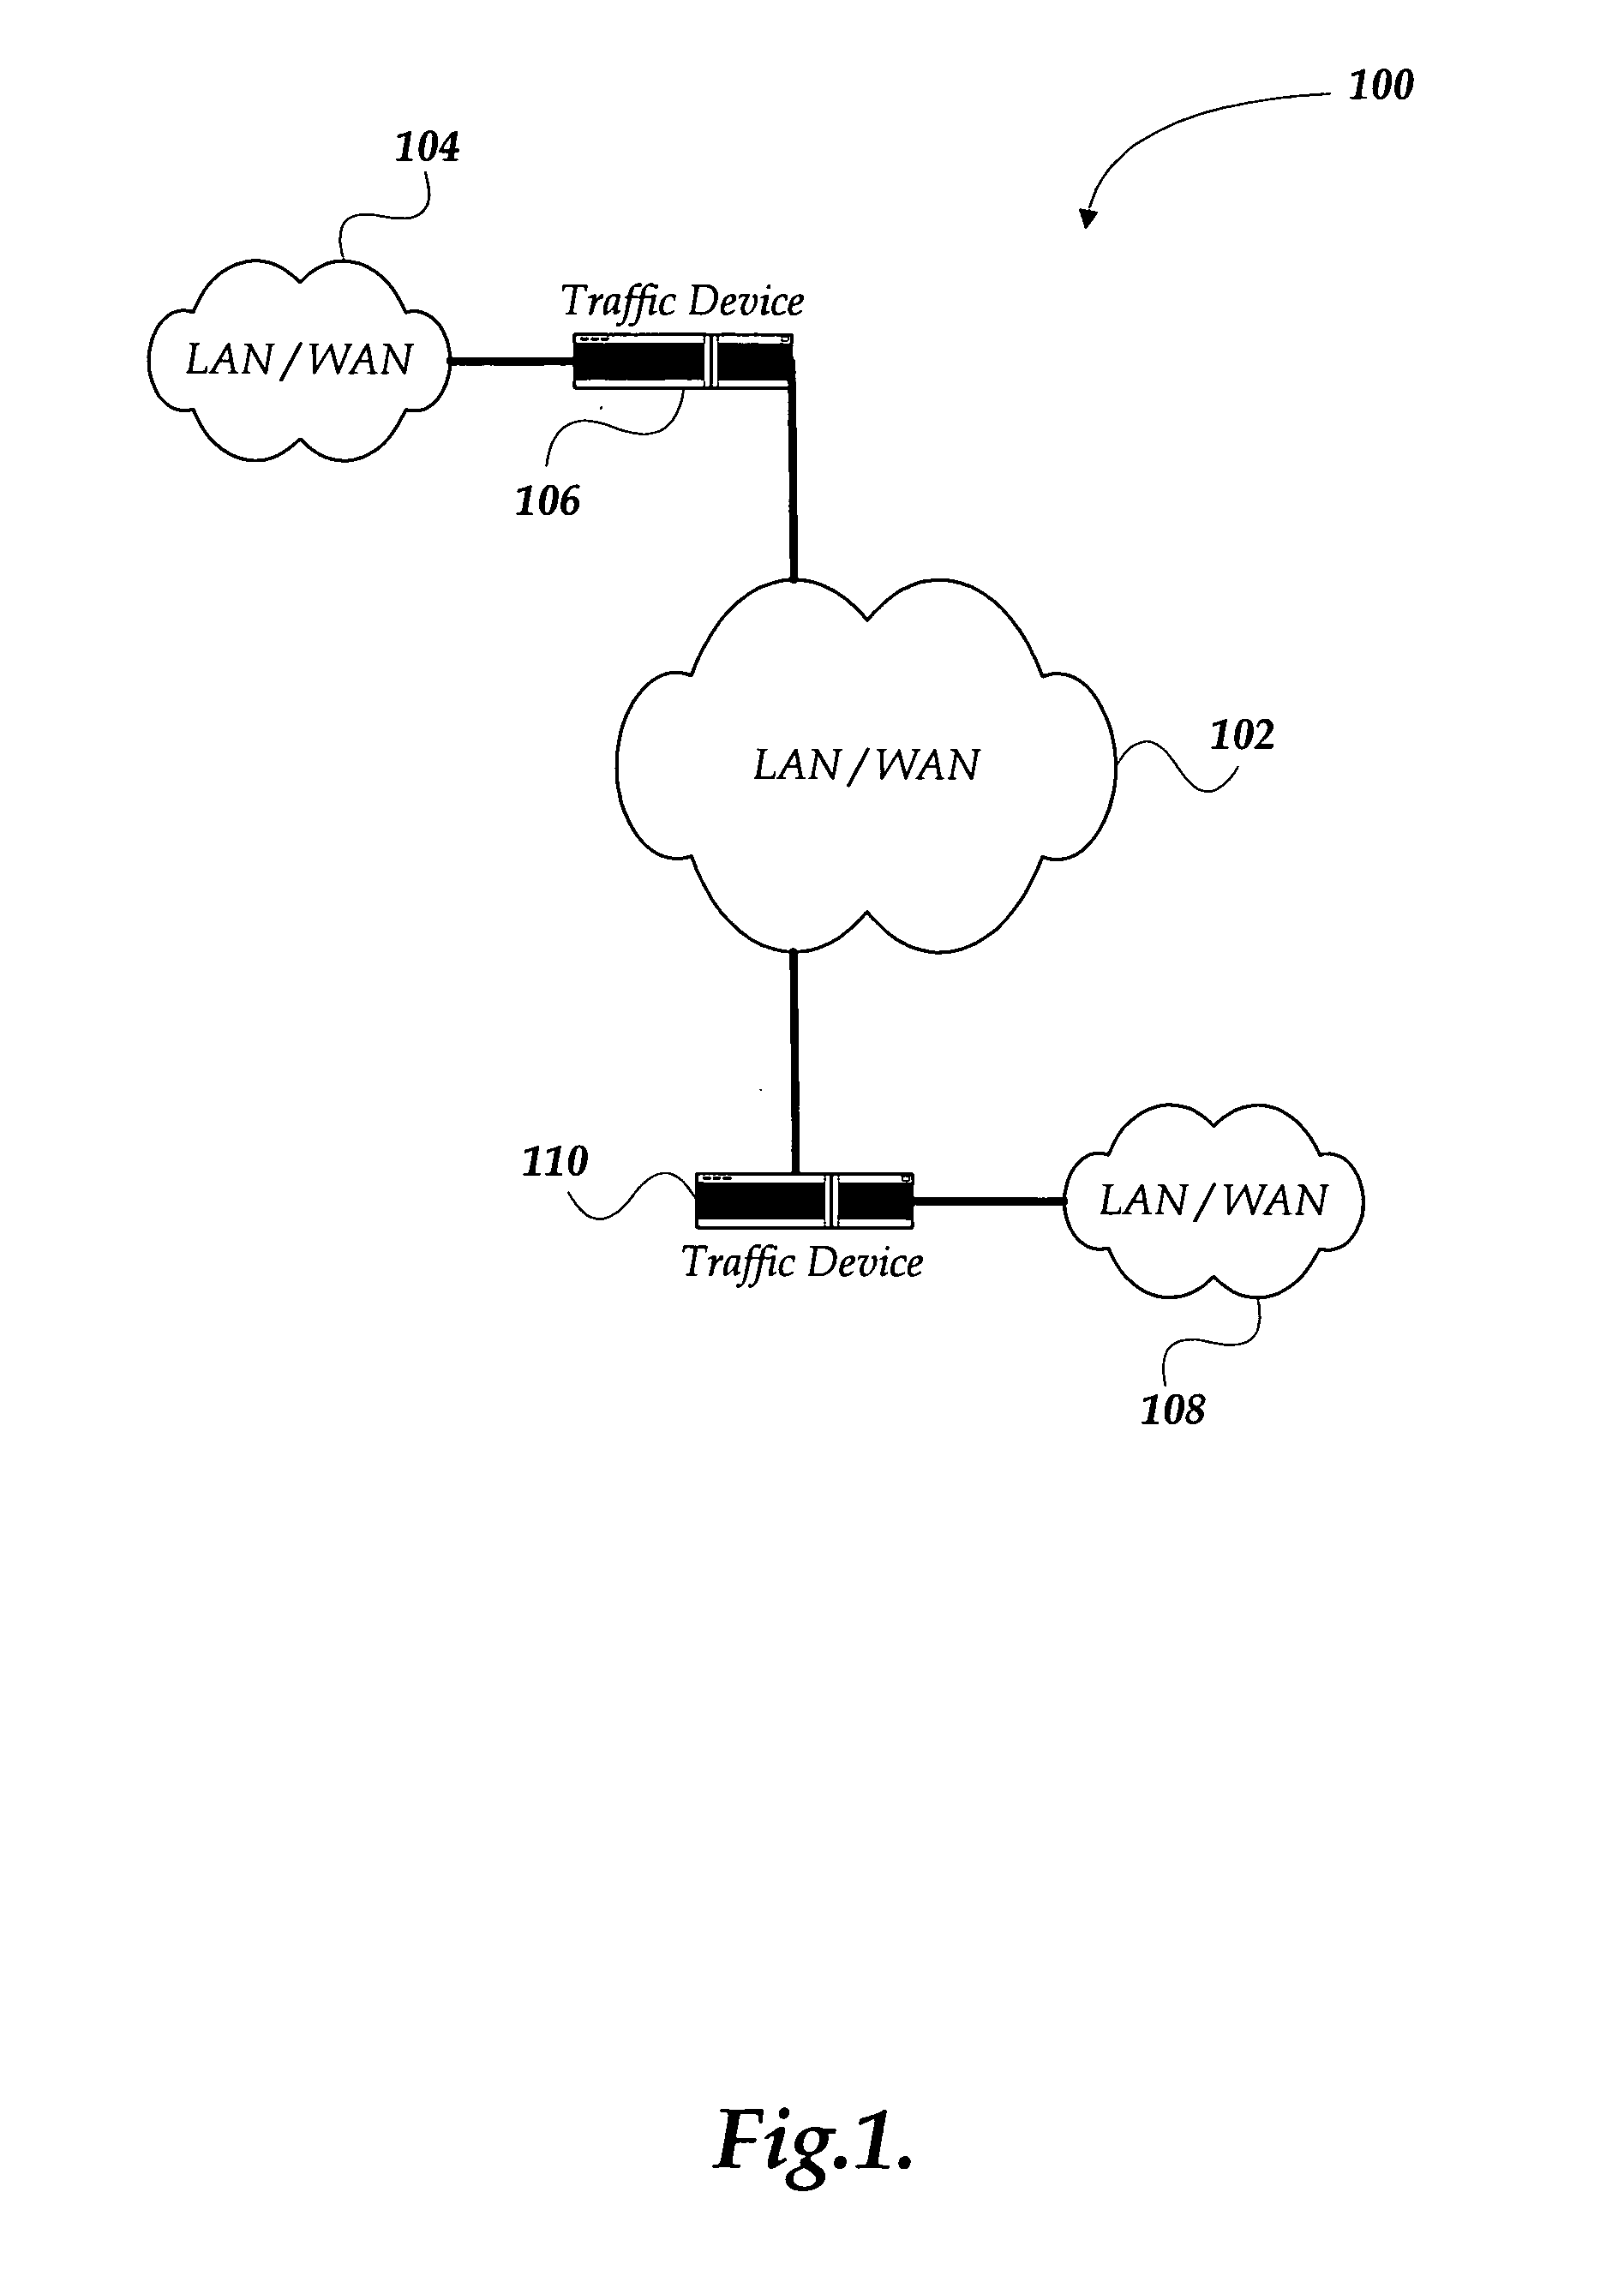 Method and apparatus for managing network traffic using cyclical redundancy check hash functions